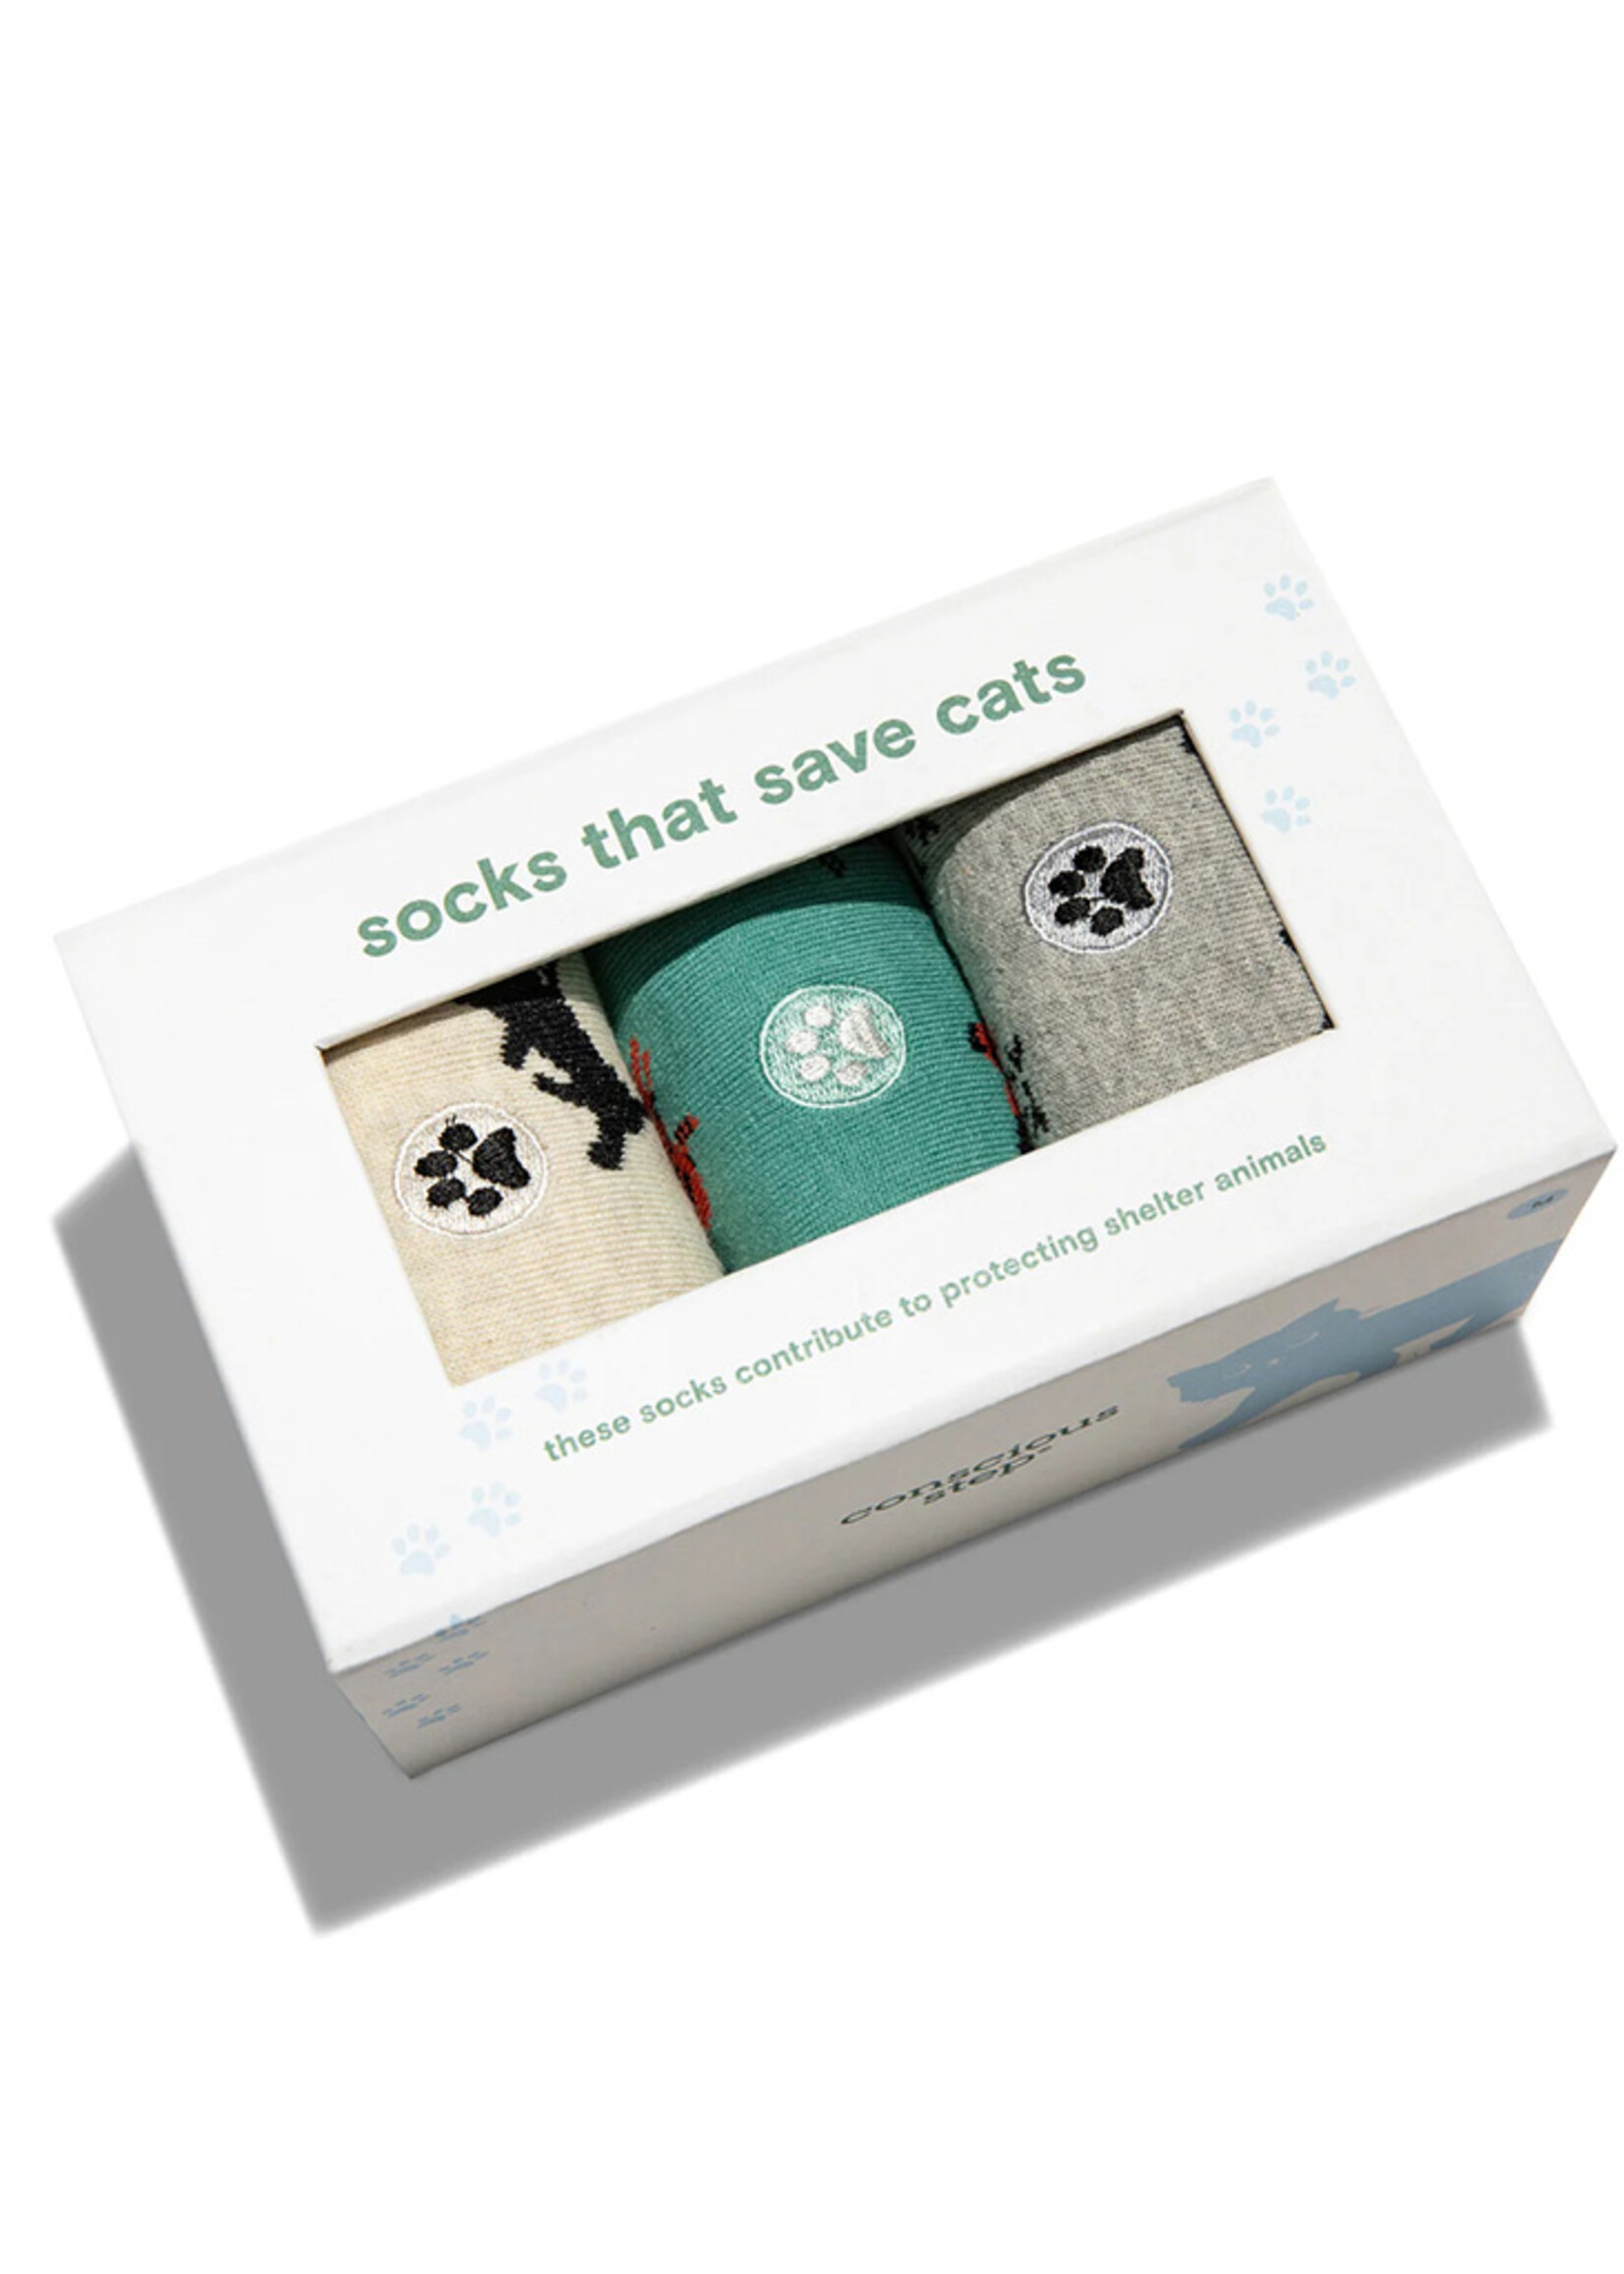 Conscious Step Men's Sock Box that Save Cats